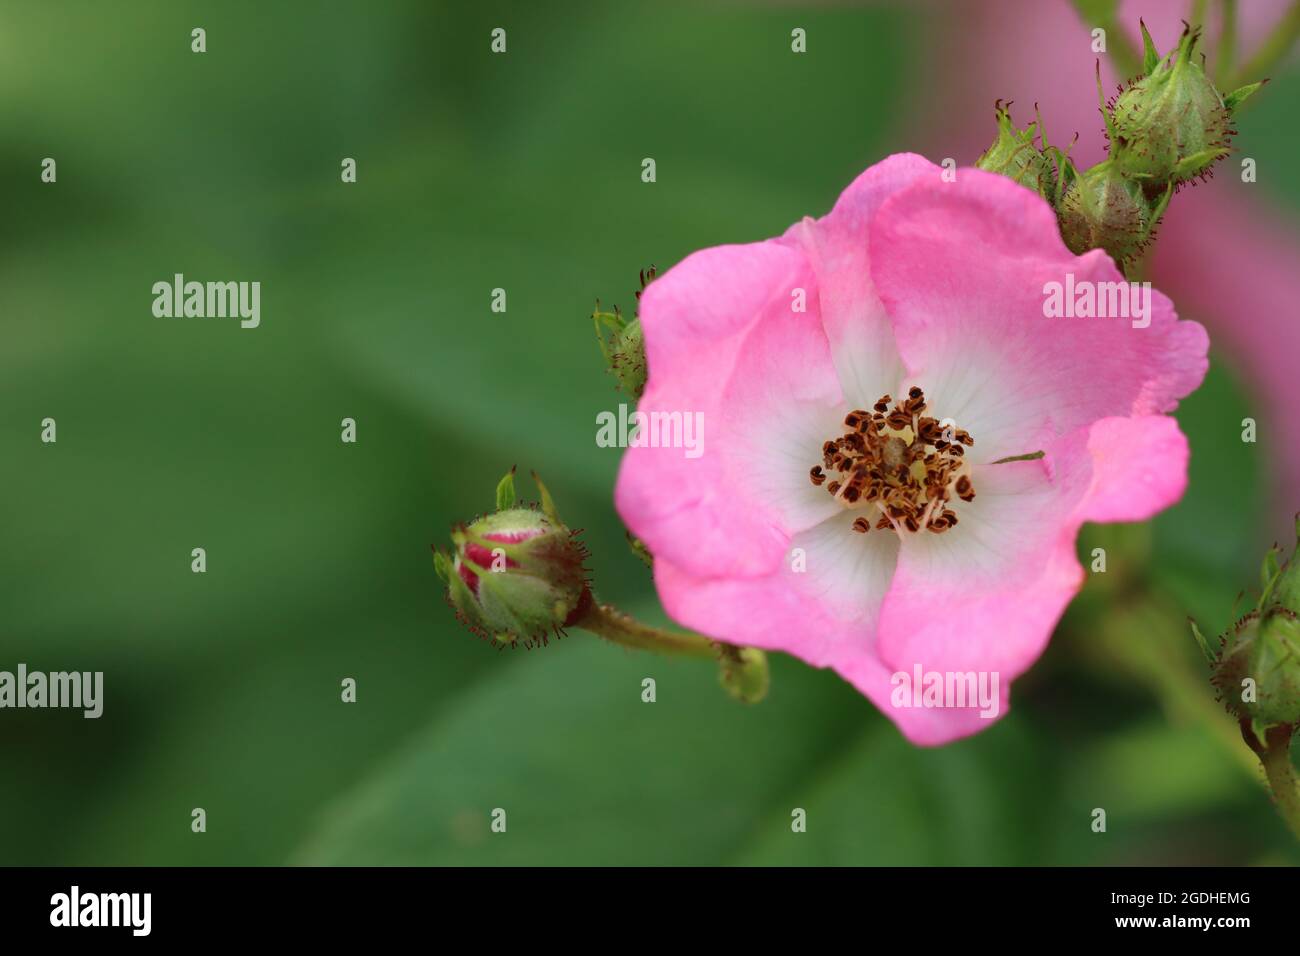 a delicate pink rose blossom against a green natural background Stock Photo